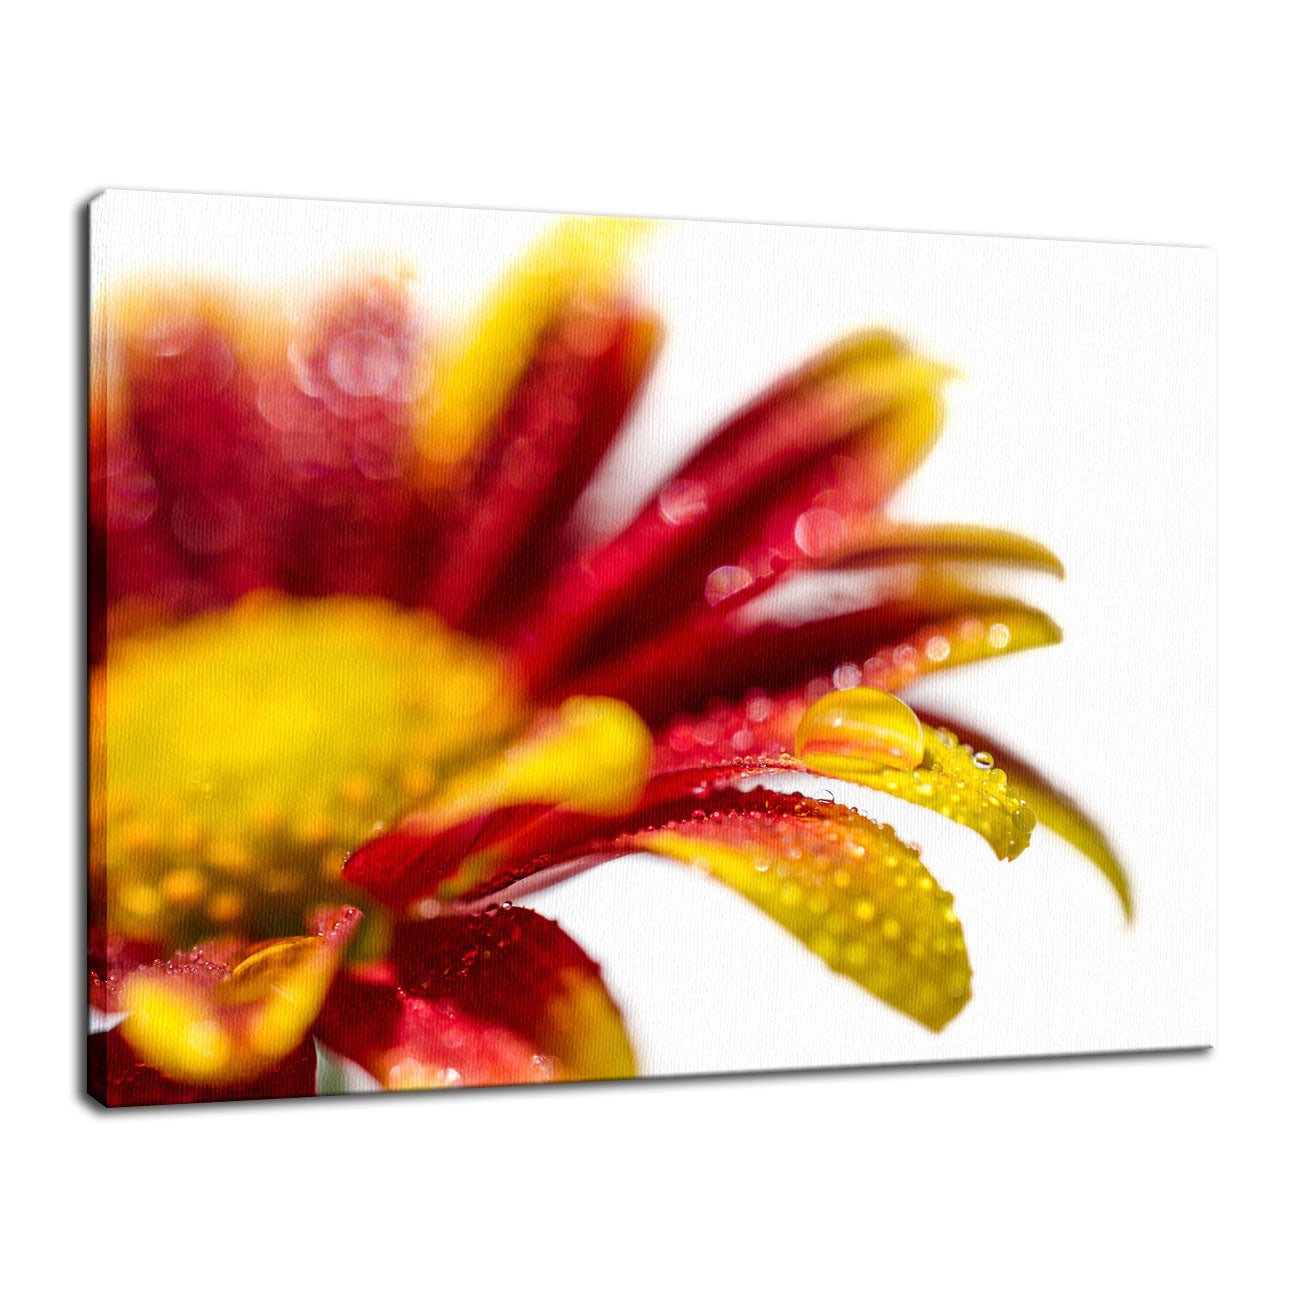 Water Droplets On Mum Petals Nature / Floral Photo Fine Art Canvas Wall Art Prints  - PIPAFINEART